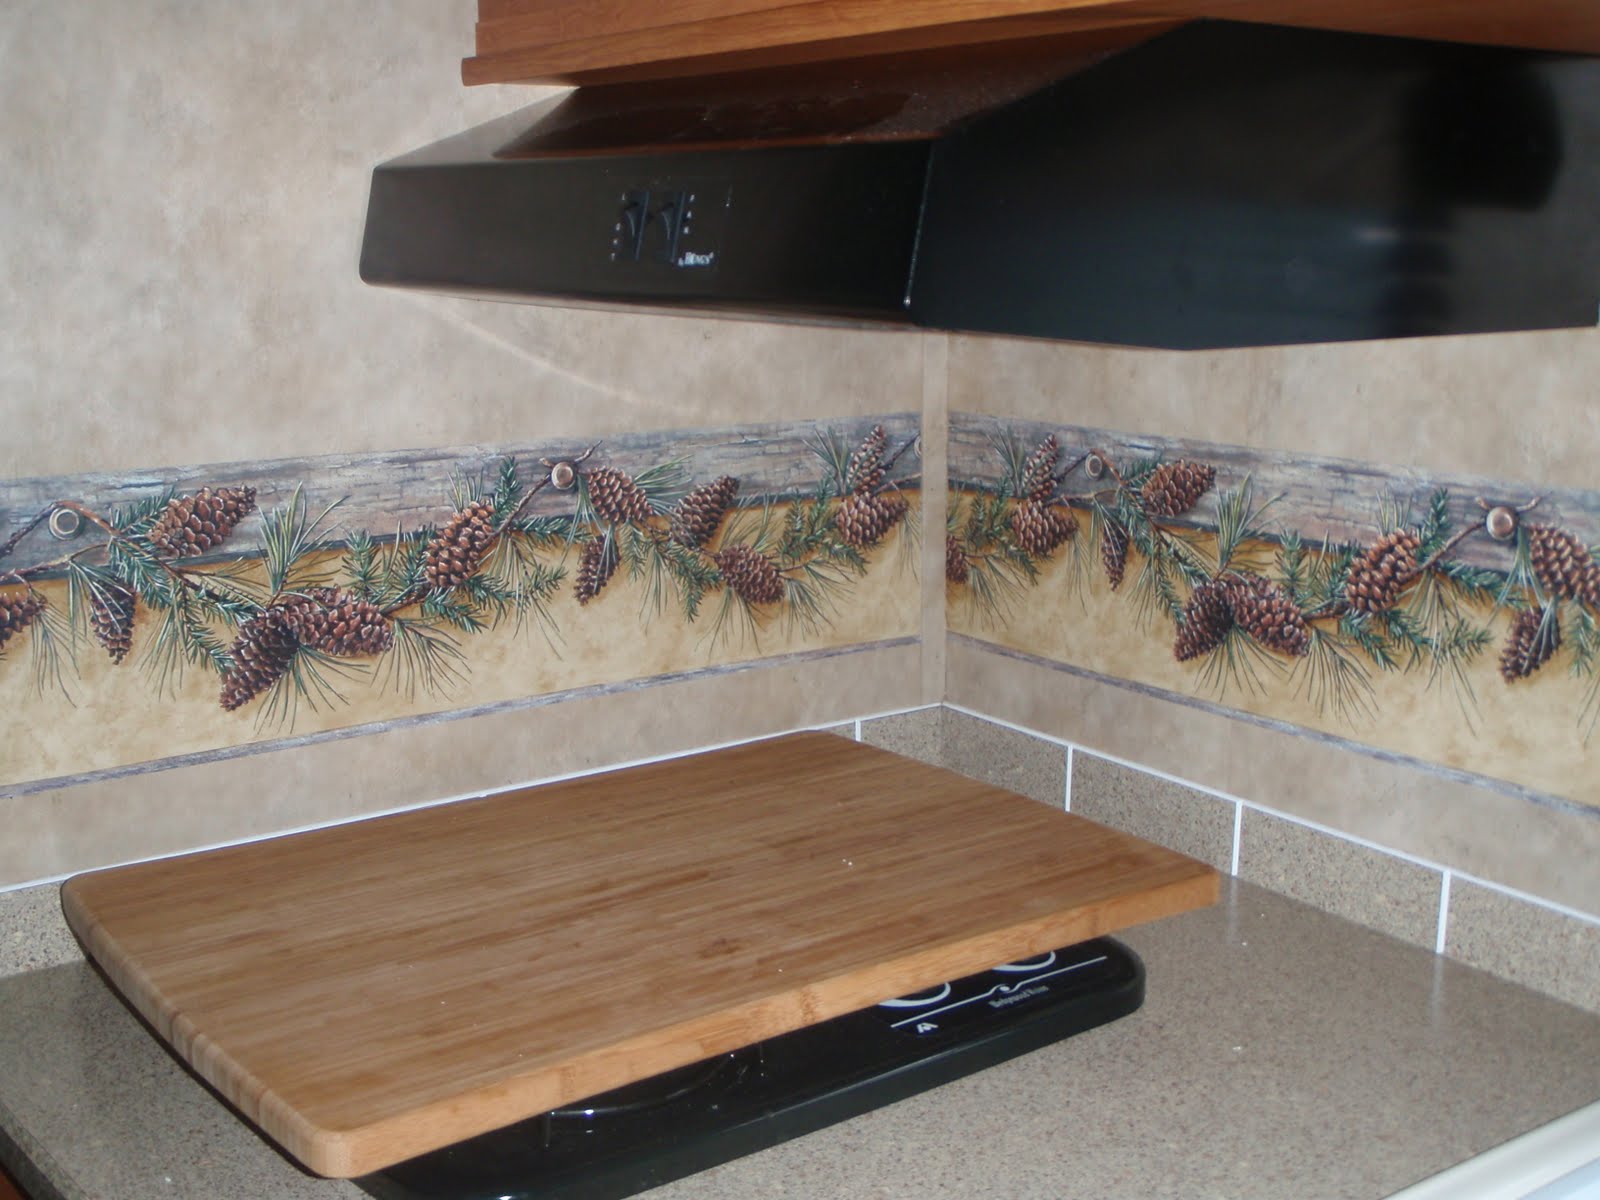 Adventures with the Visa: New wallpaper border and stove cover